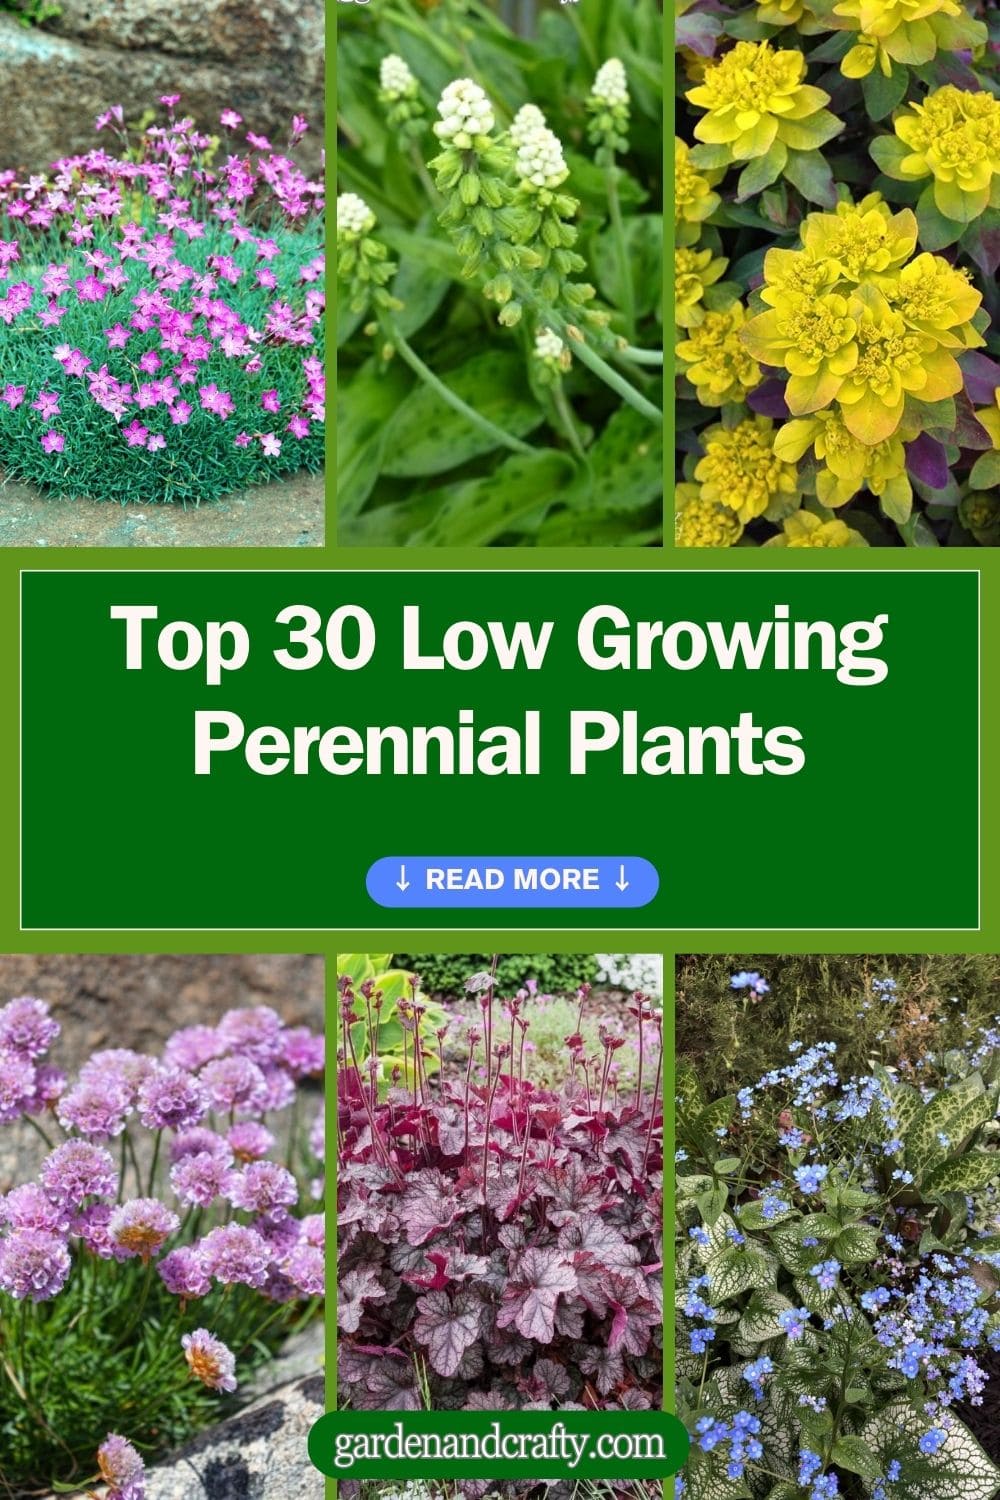 Top 30 Low Growing Perennial Plants For Your Garden